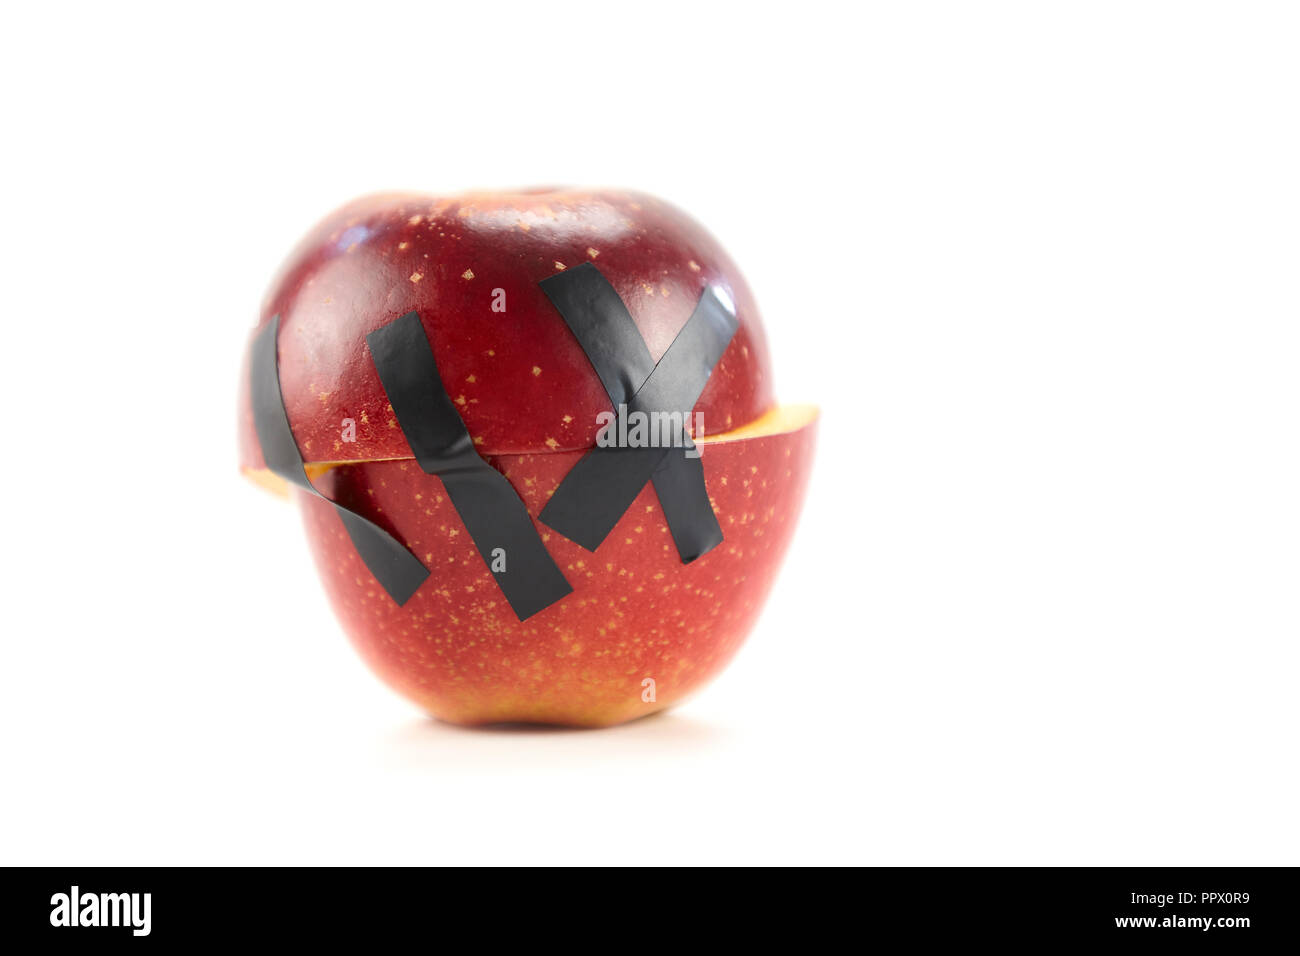 two halves of a red apple held together by black tape isolated on white background. Stock Photo